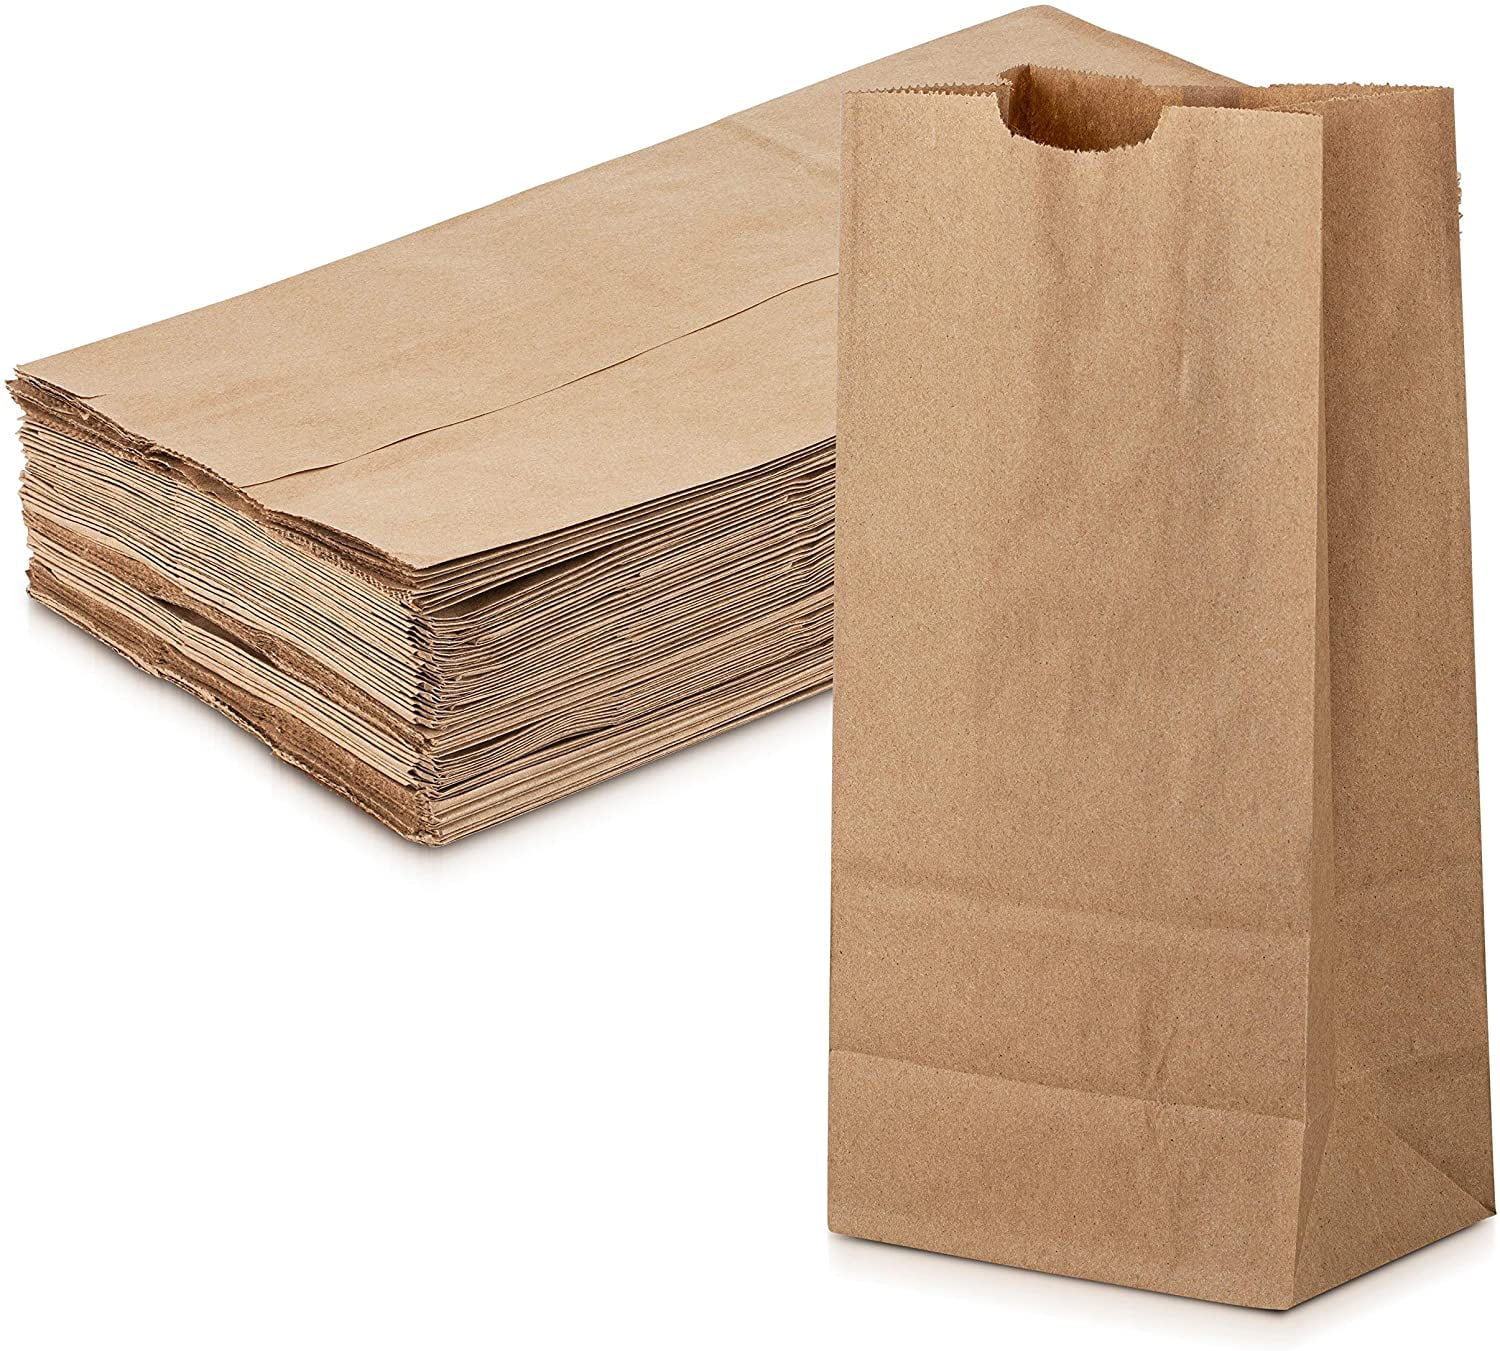 Brown Paper Goods Deli Paper 12 x 10 34 White Pack Of 500 Sheets